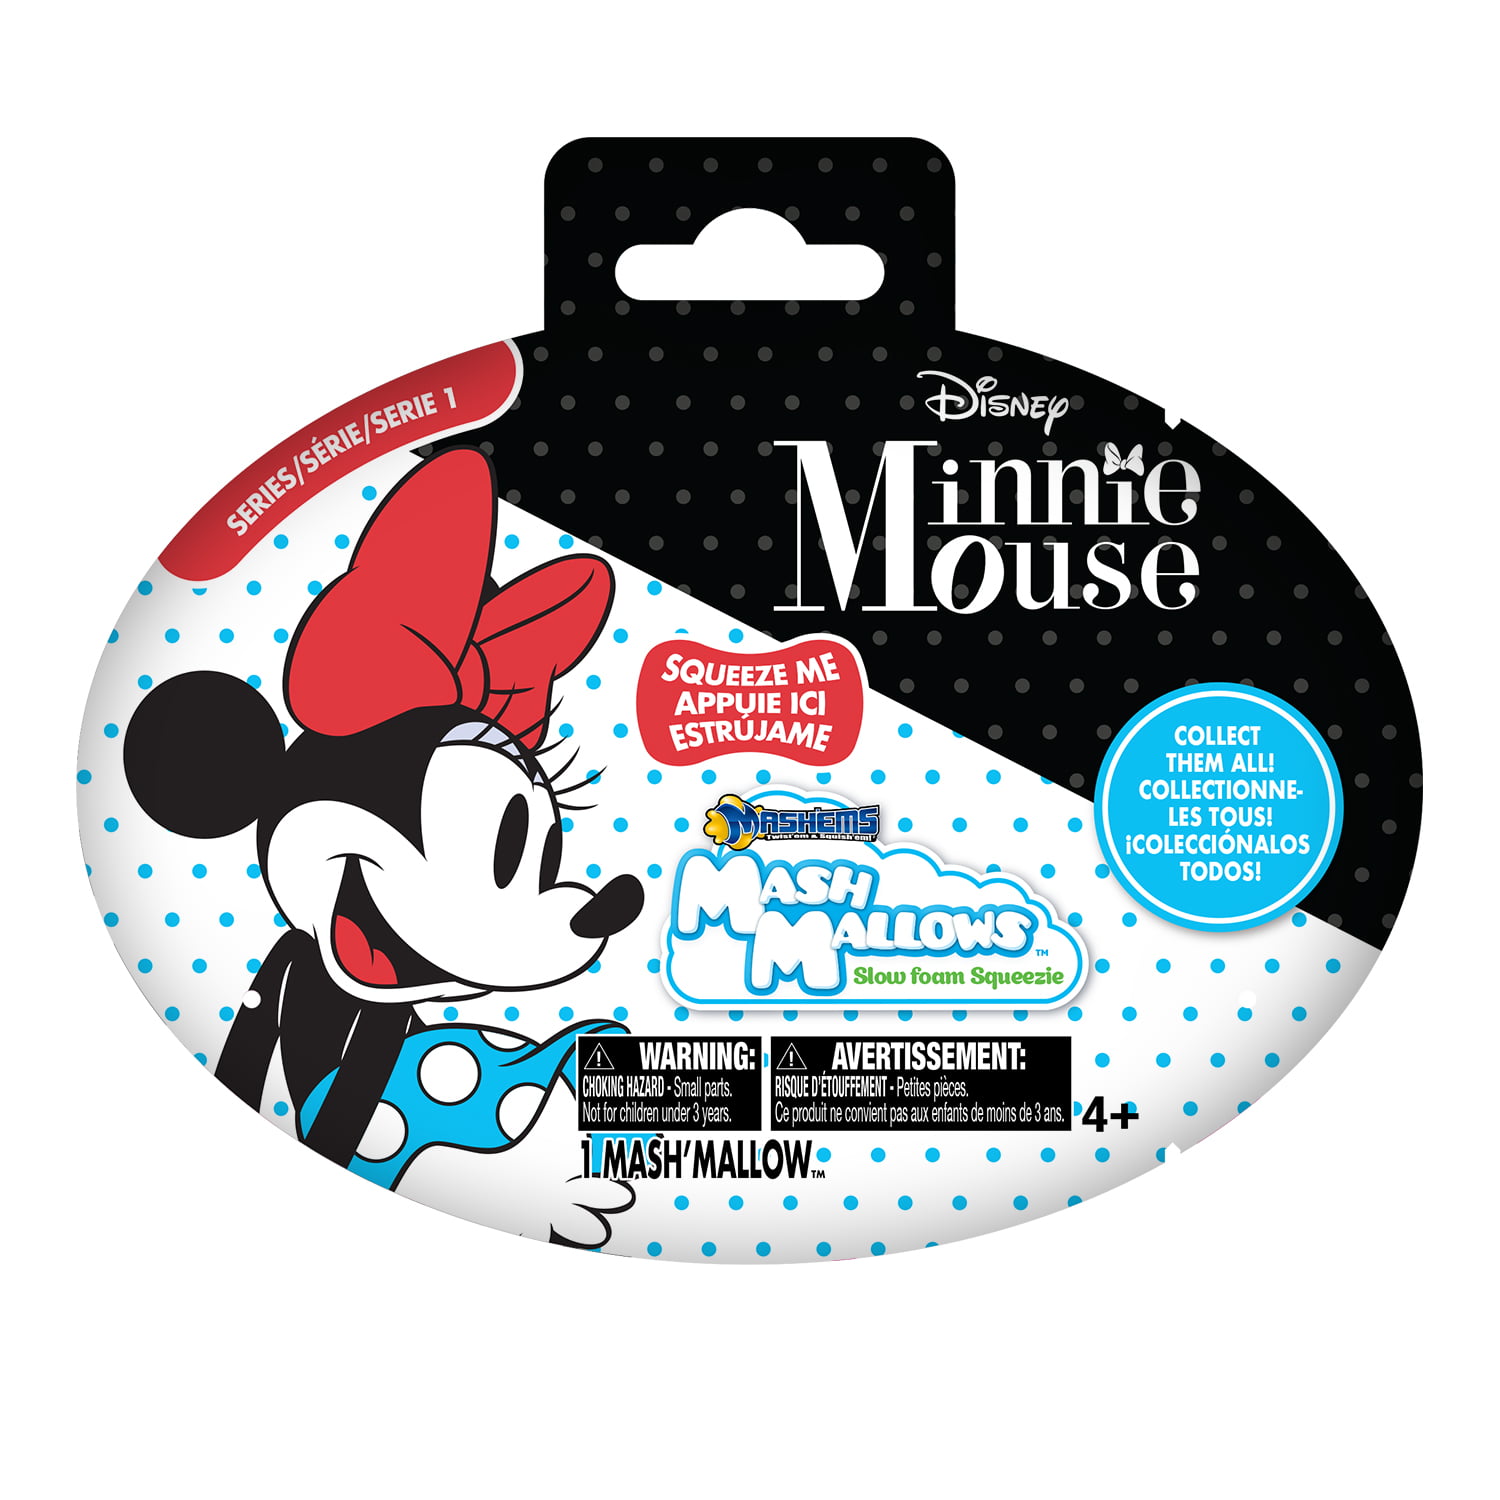 5 Disney Minnie Mouse Mash Mallows Mayhems Slow Foam Squeeze Series 1 for sale online